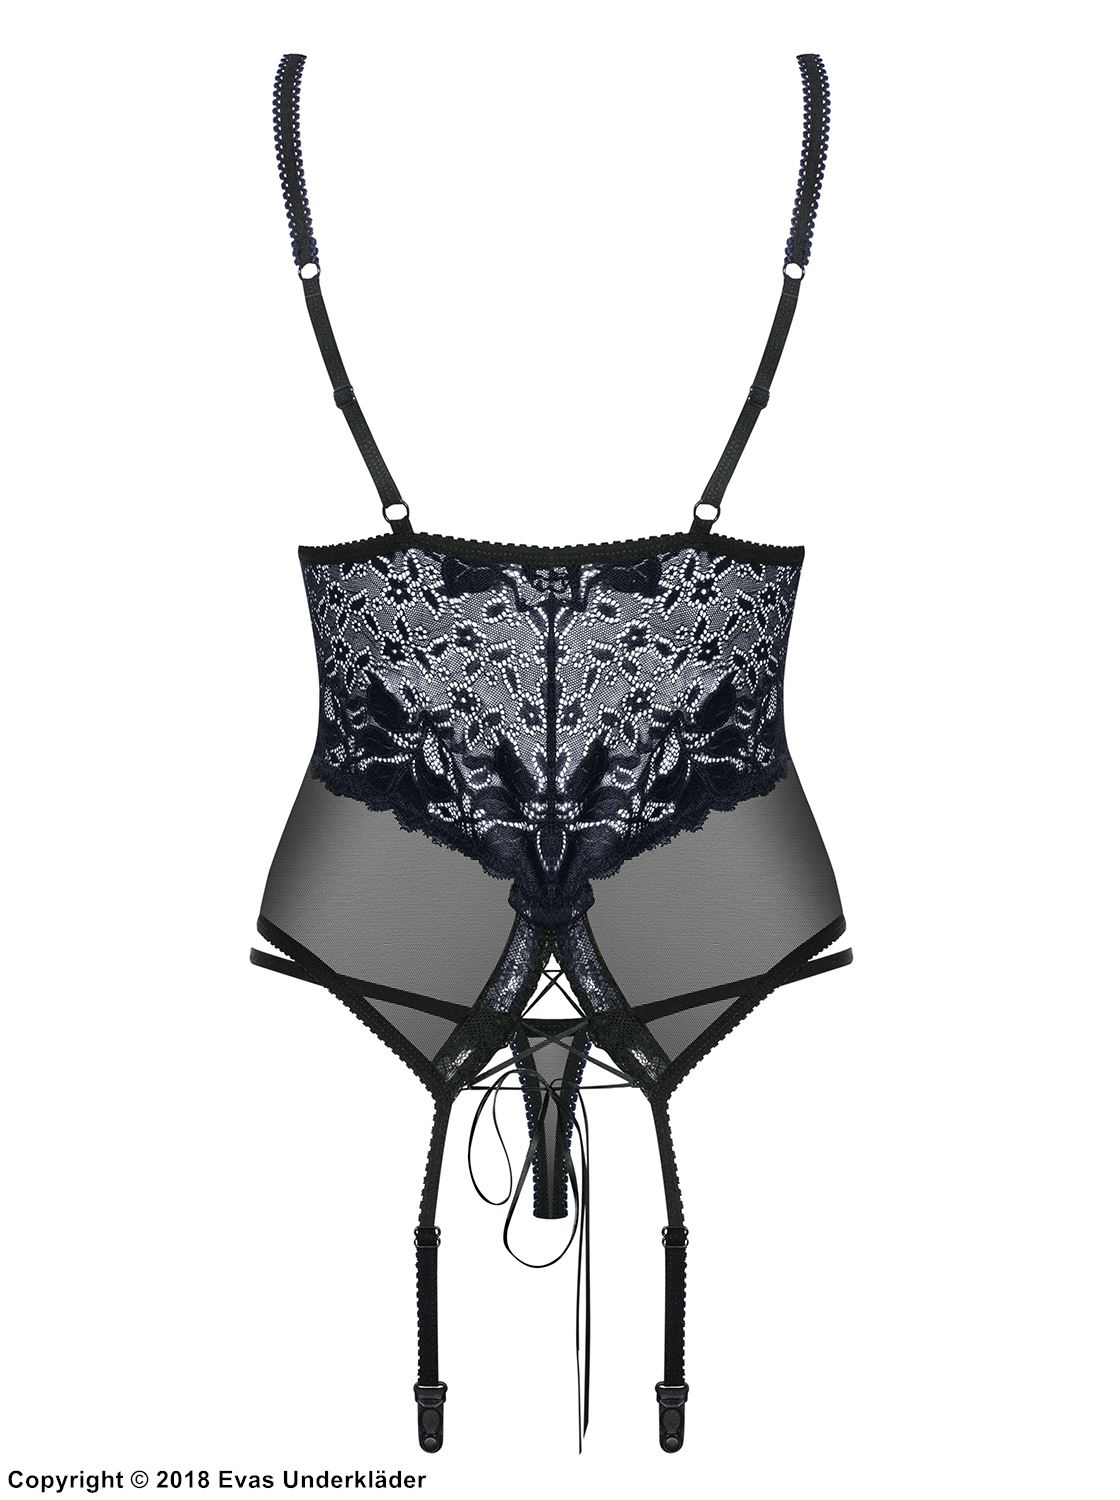 Sexy bustier, see-through mesh, lace panel, garters